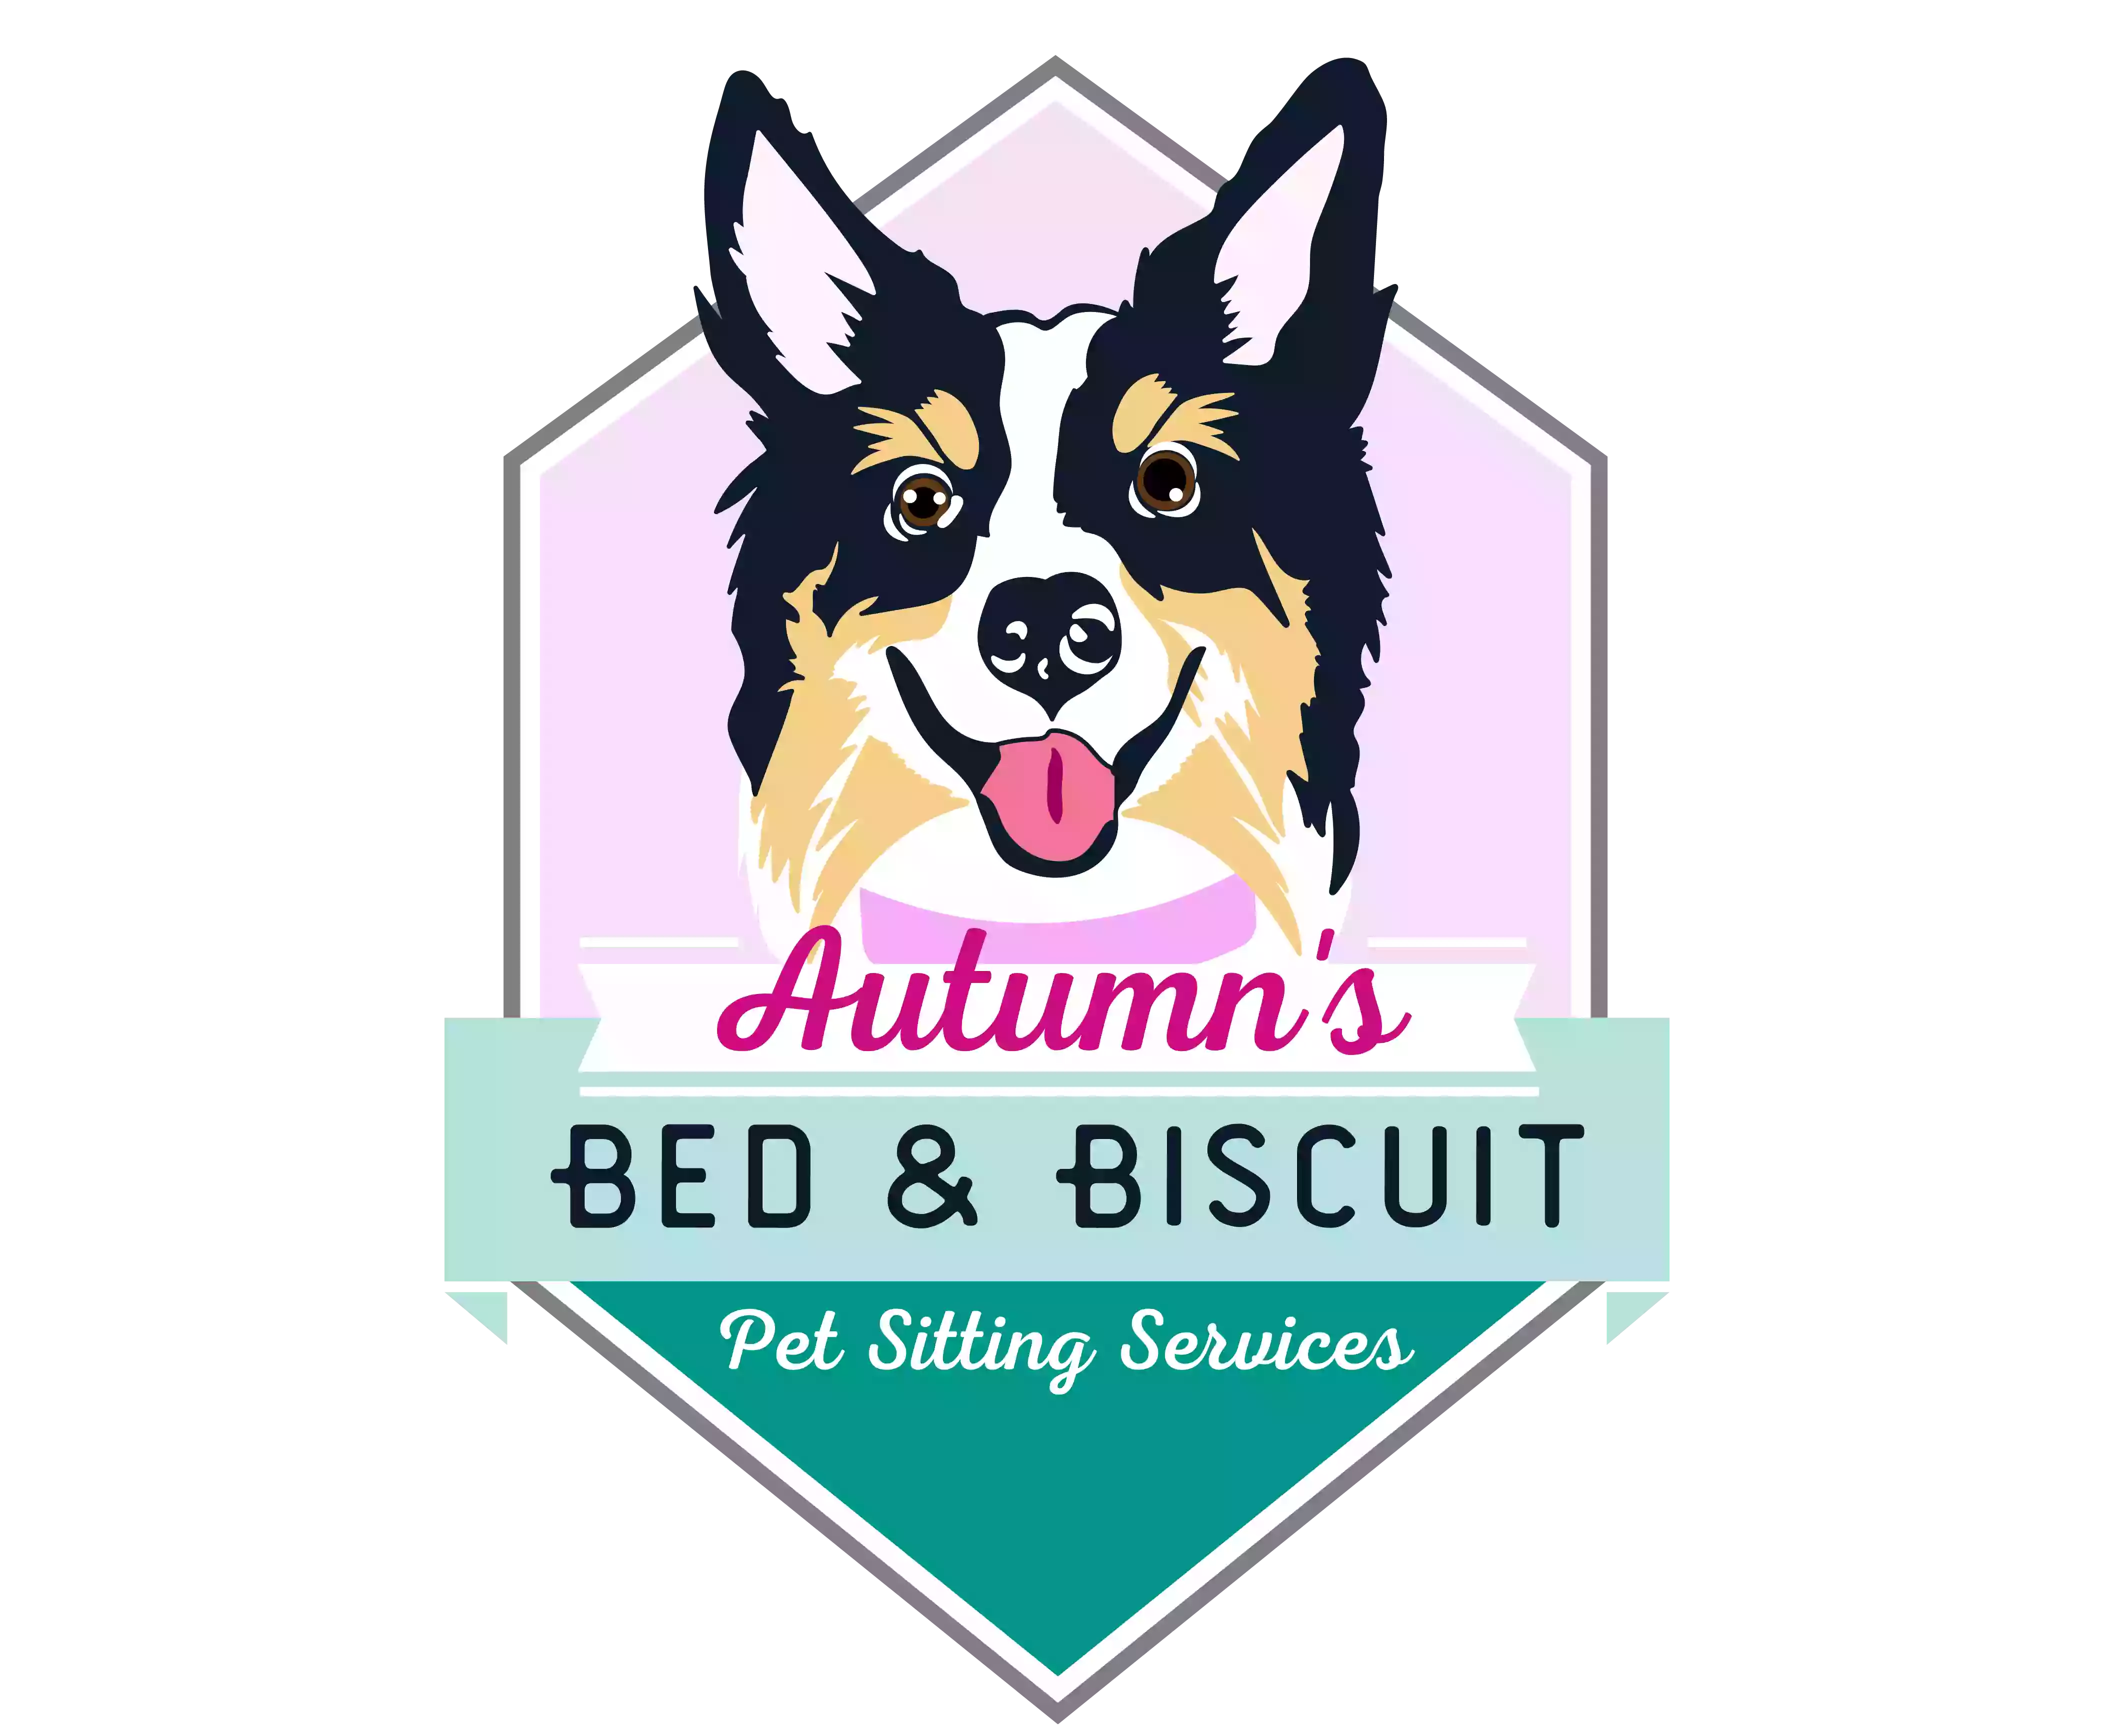 Autumn's Bed & Biscuit Pet Sitting Services